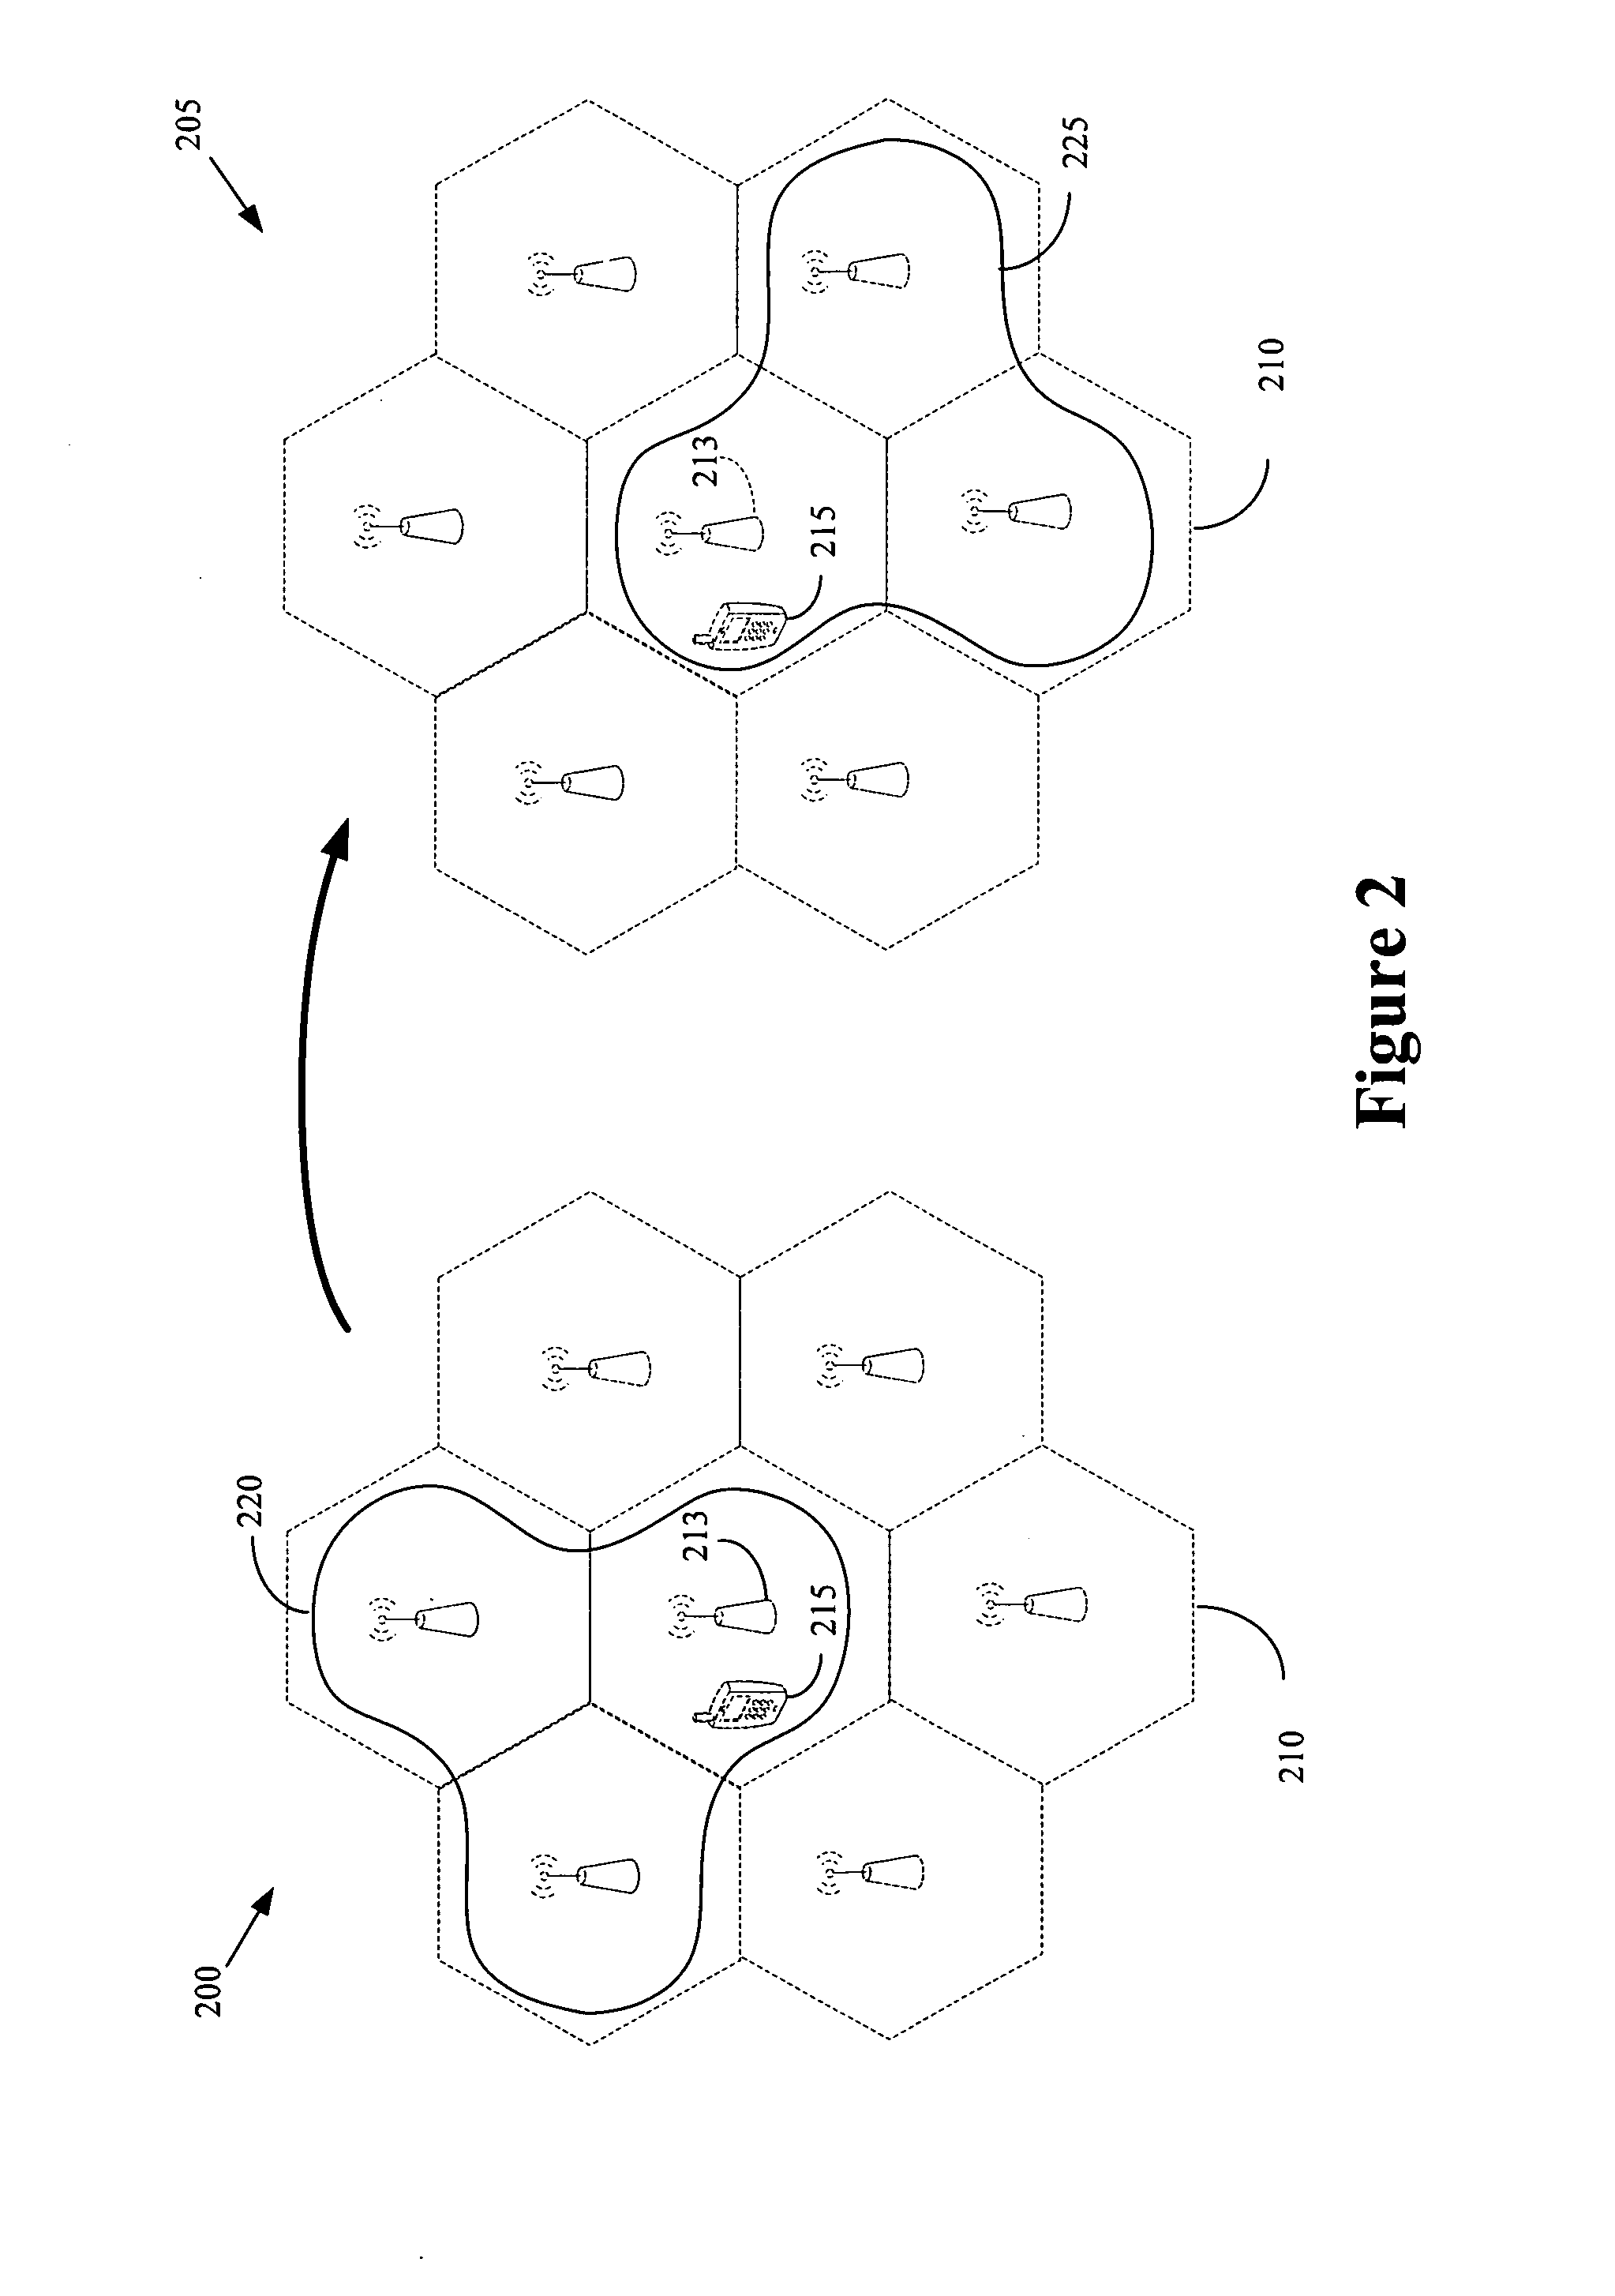 Method for adaptive formation of cell clusters for cellular wireless networks with coordinated transmission and reception